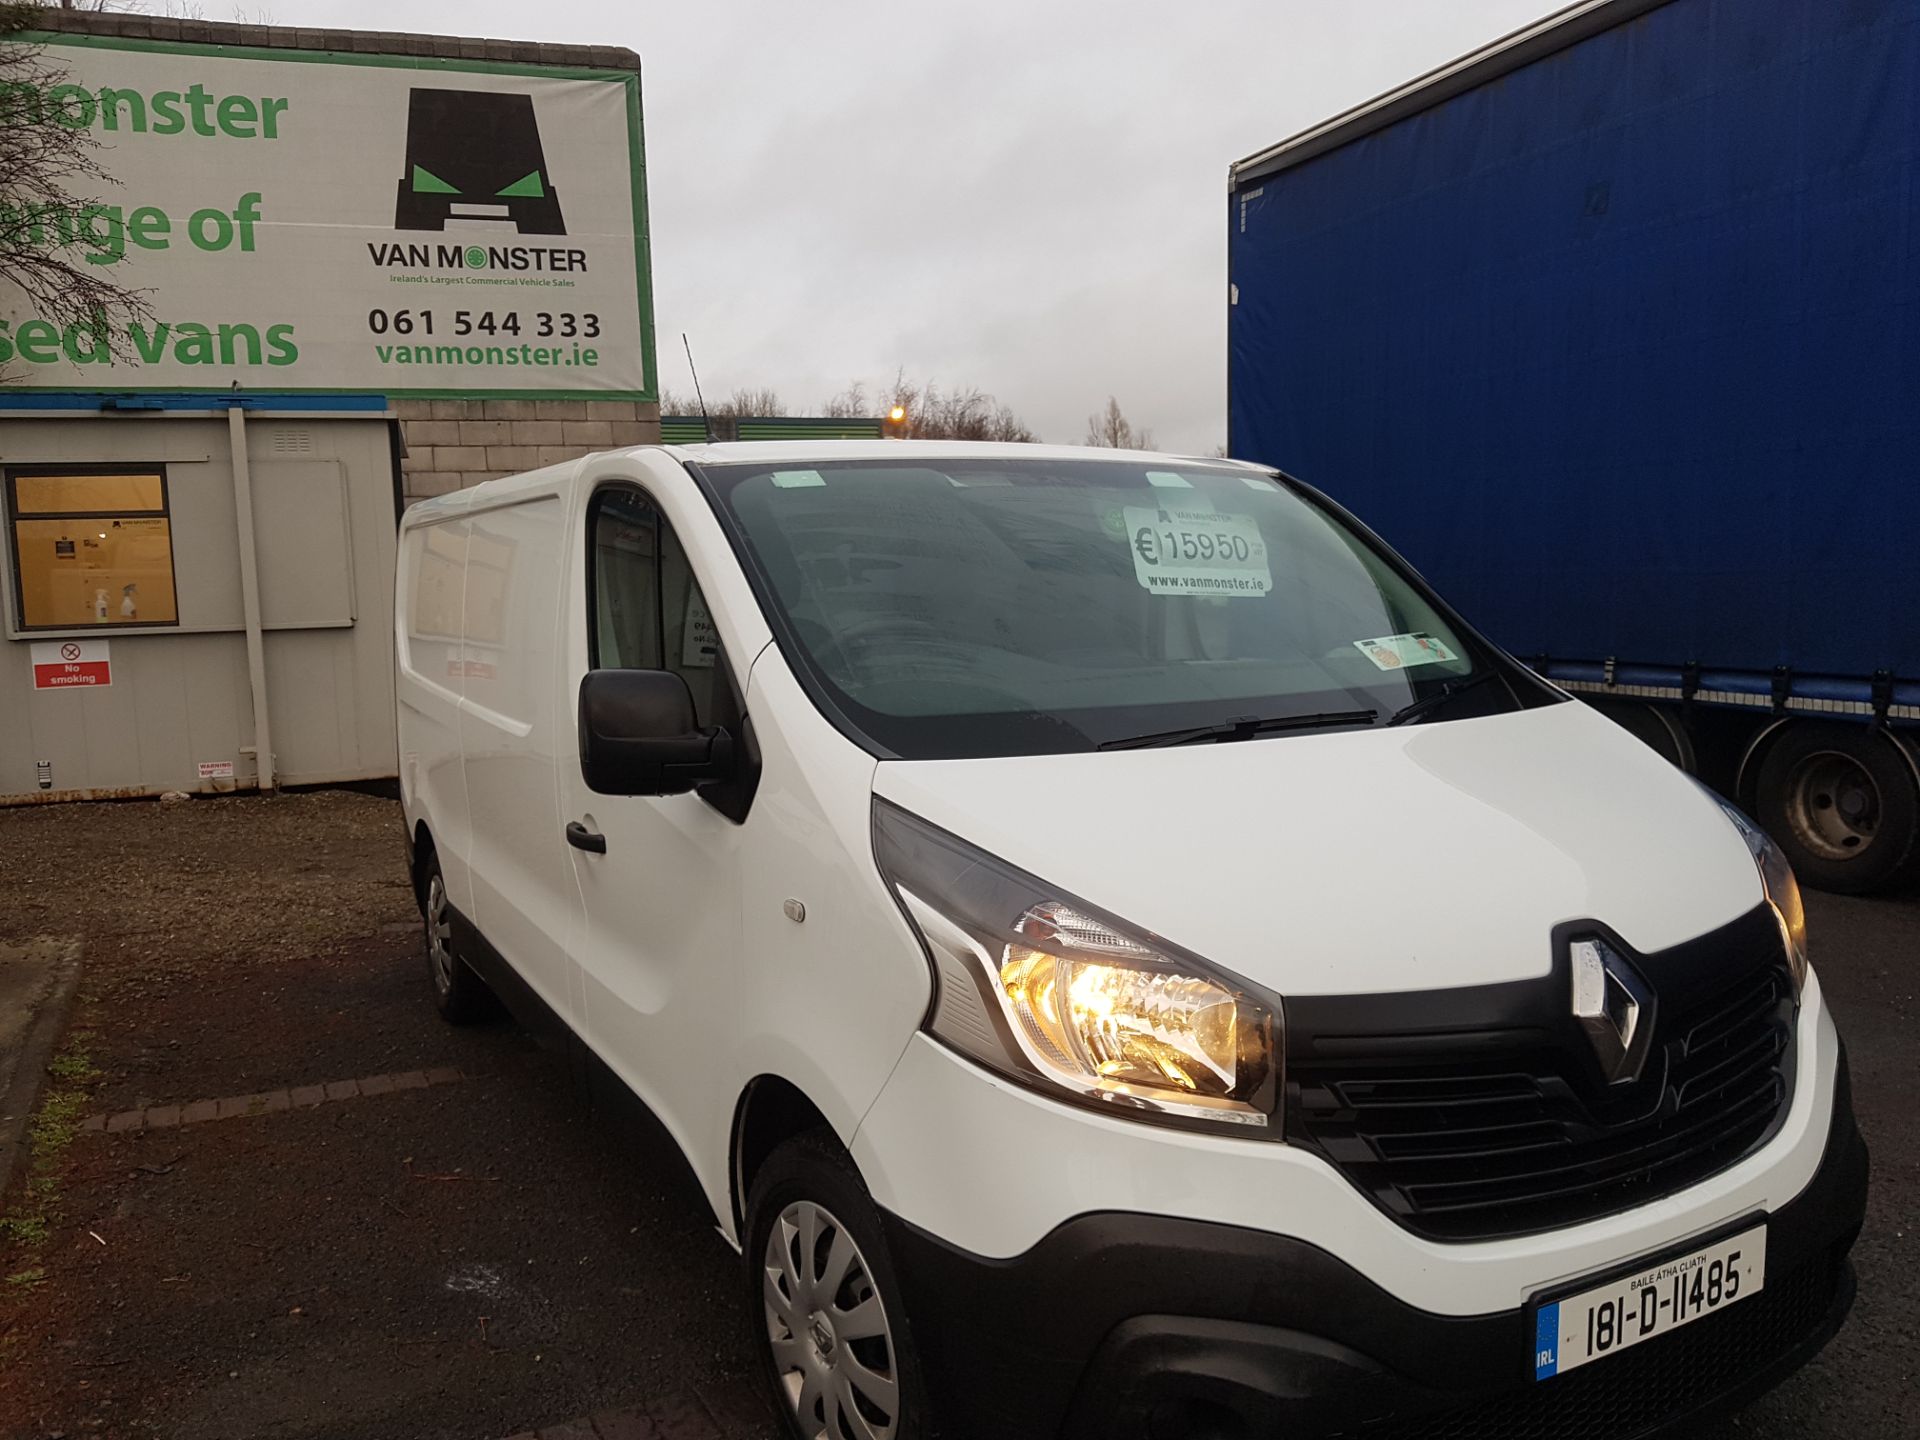 2018 Renault Trafic LL29 DCI 120 Business 3DR (181D11485) Image 1